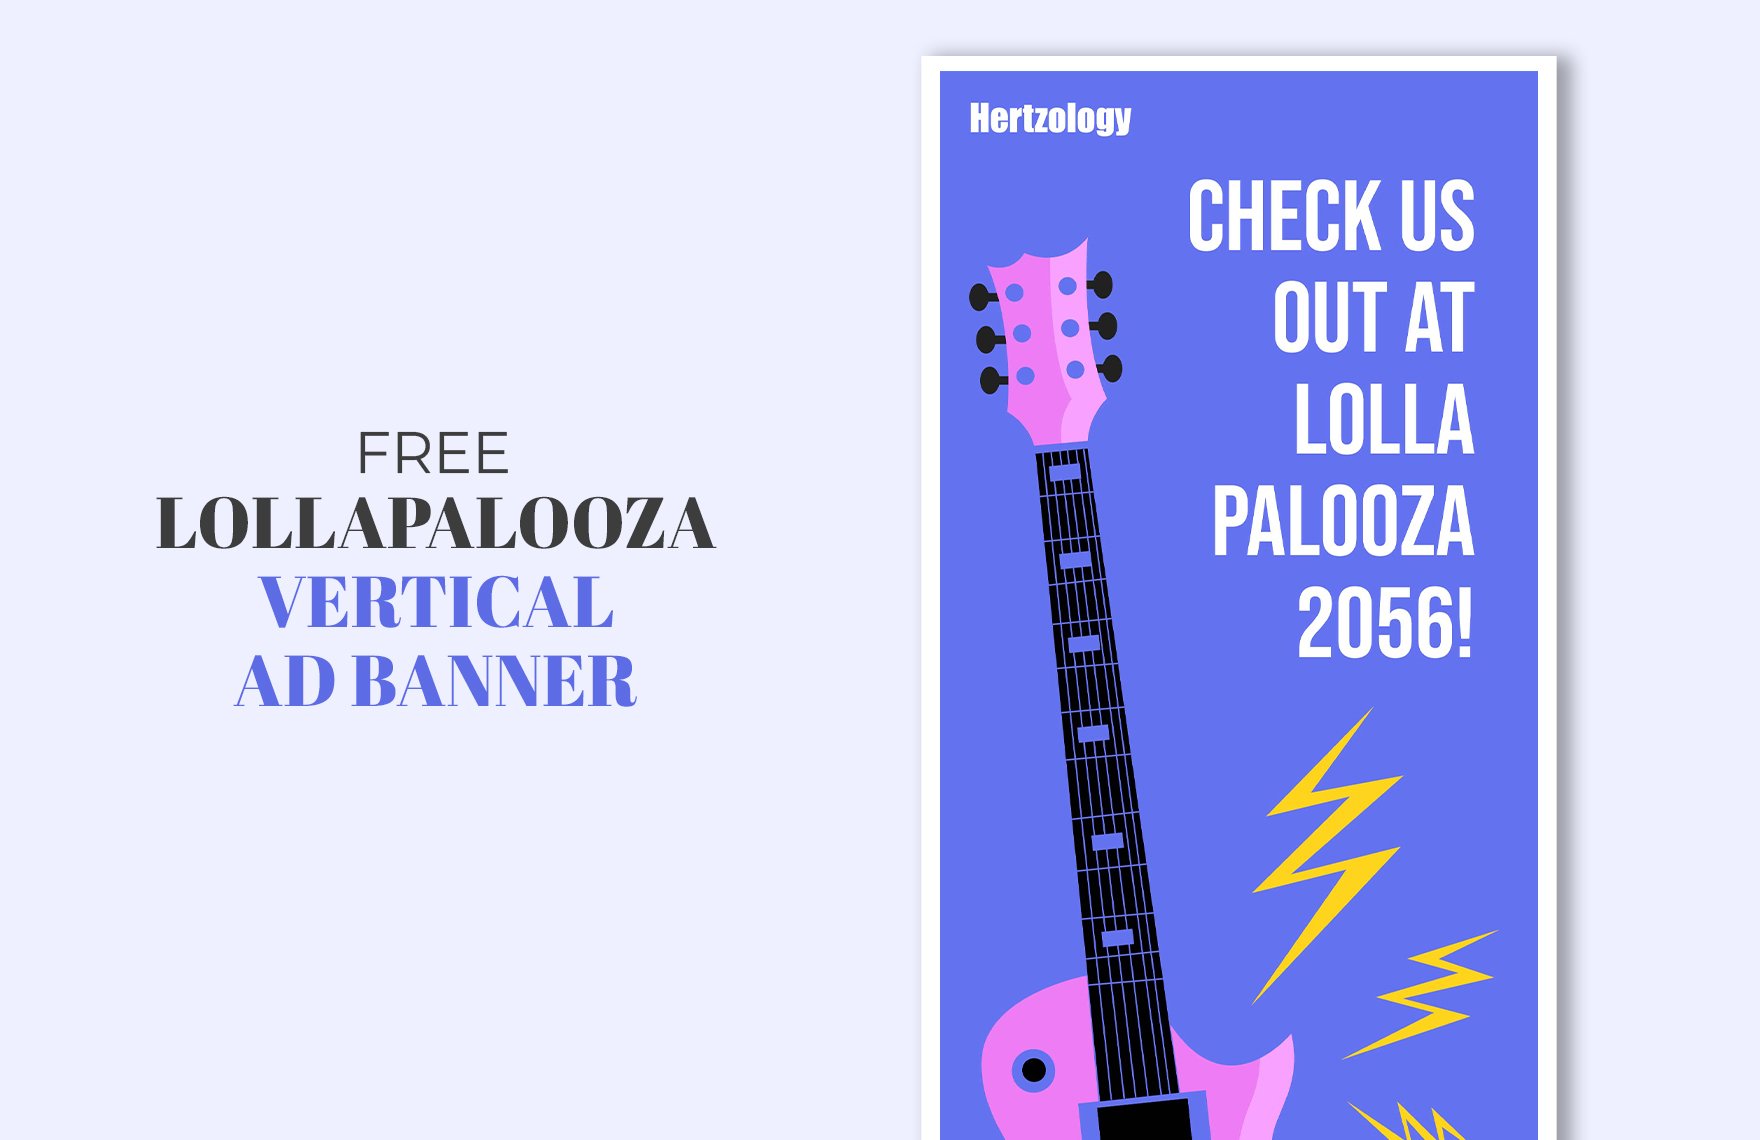 Lollapalooza Vertical Ad Banner